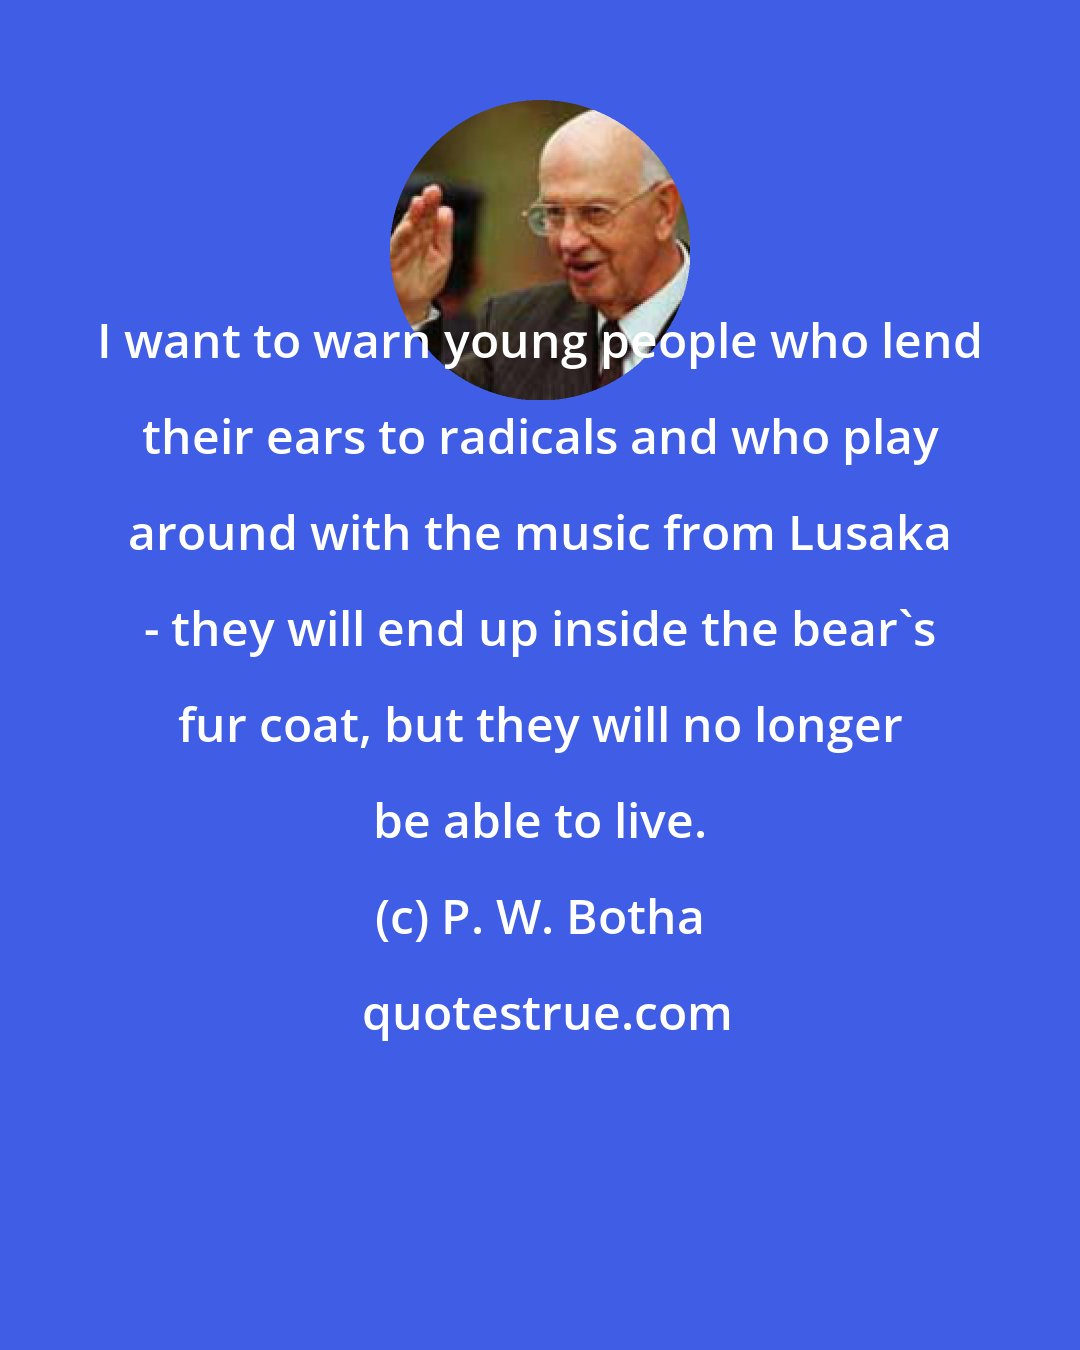 P. W. Botha: I want to warn young people who lend their ears to radicals and who play around with the music from Lusaka - they will end up inside the bear's fur coat, but they will no longer be able to live.